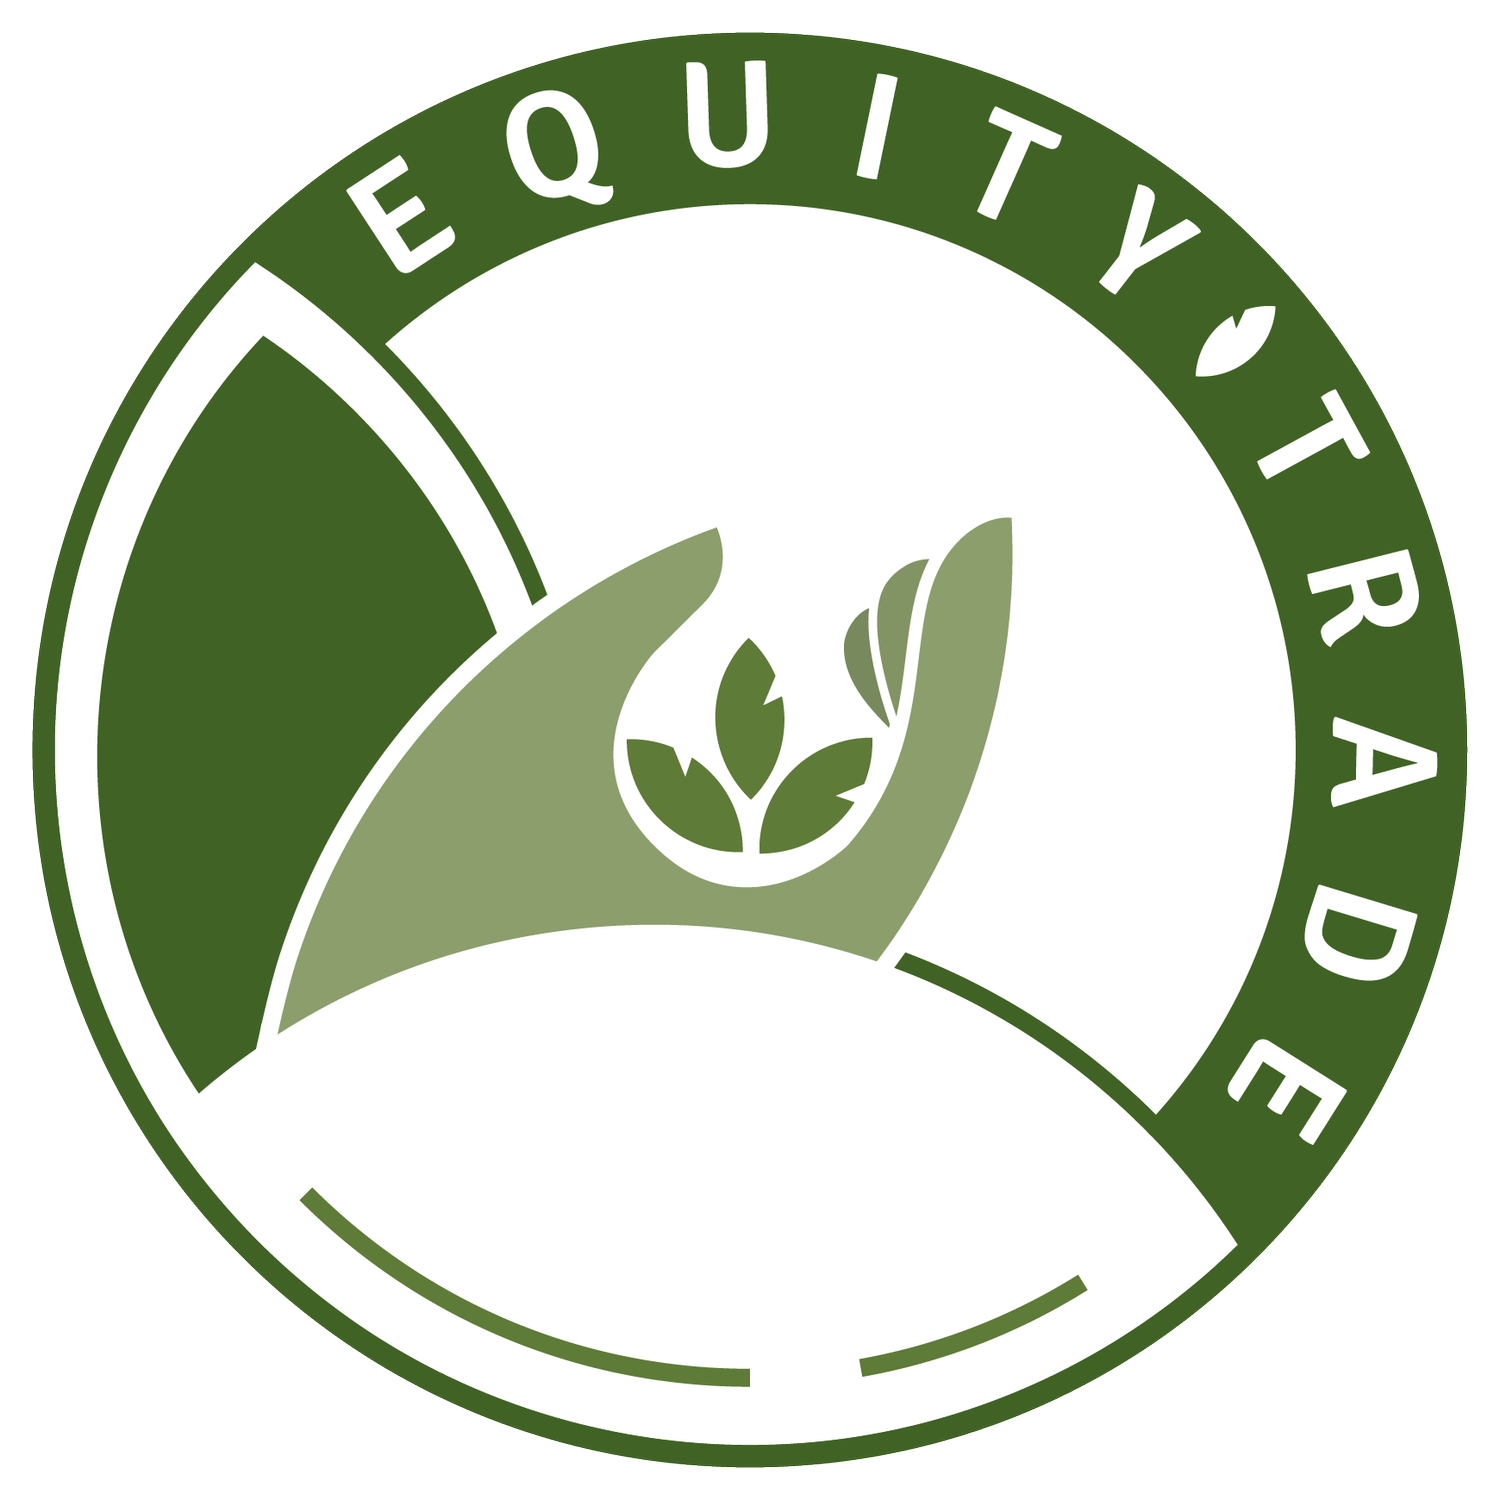 Equity Trade Network